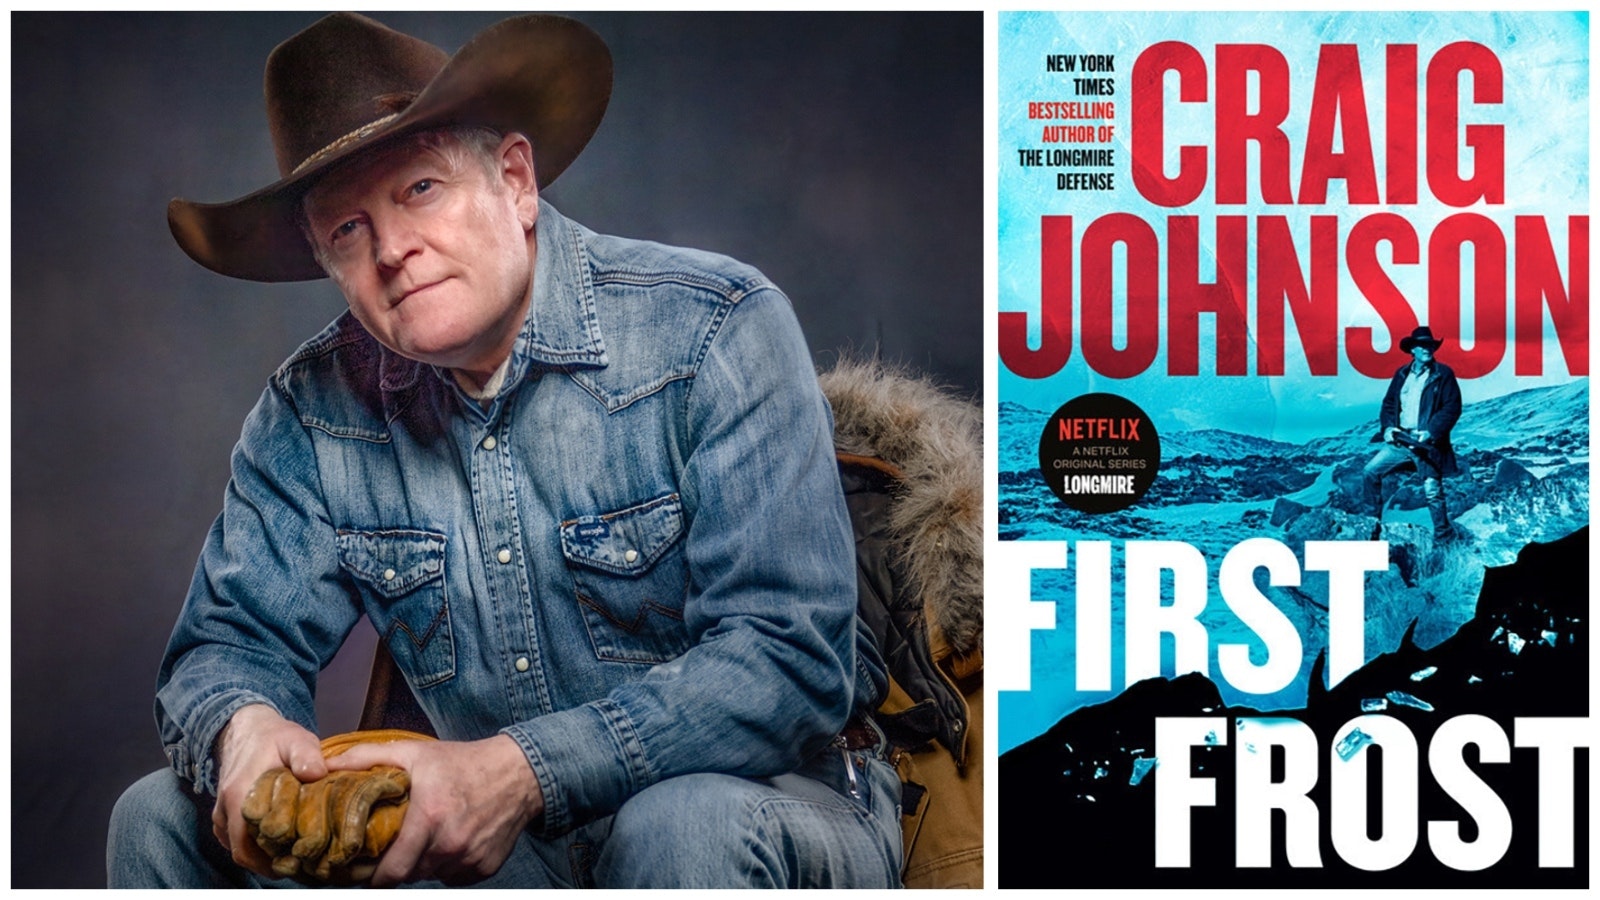 Wyoming bestselling author Craig Johnson is releasing the latest story in his Walt Longmire saga, "First Frost," in May.